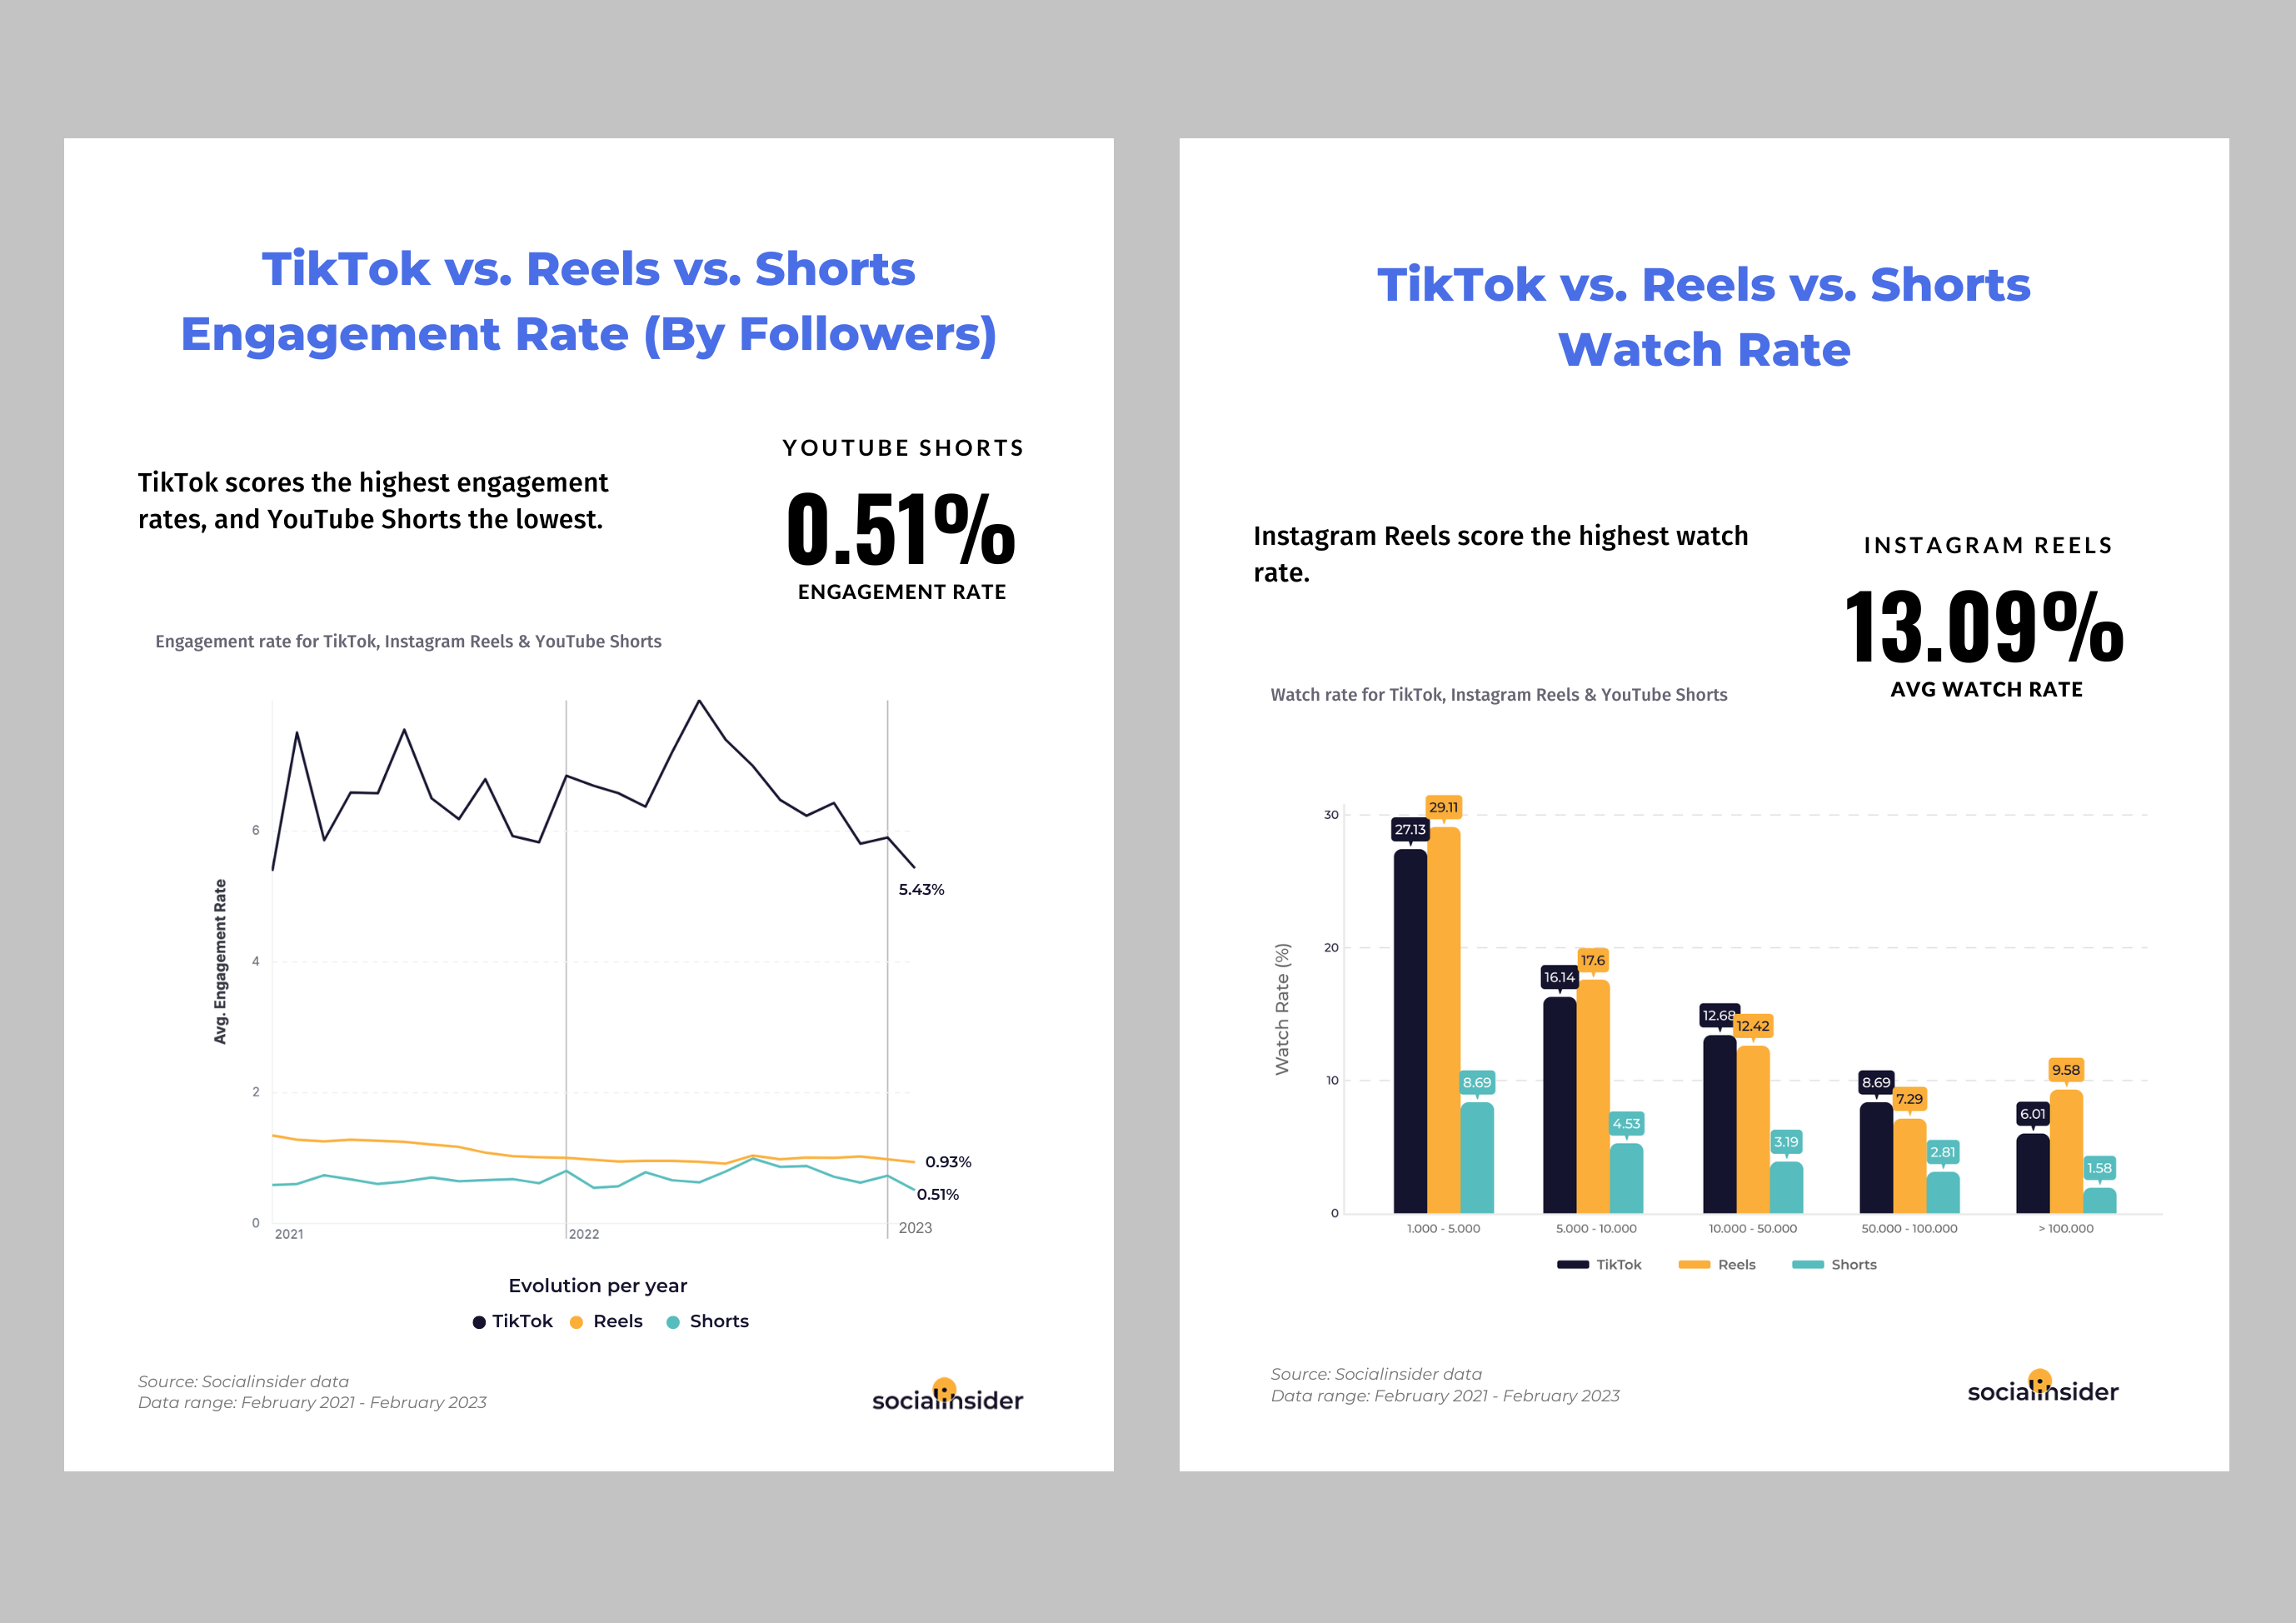 Ad Rates For Twitter/X Plunge While TikTok's Skyrocket, Study Shows  10/27/2023